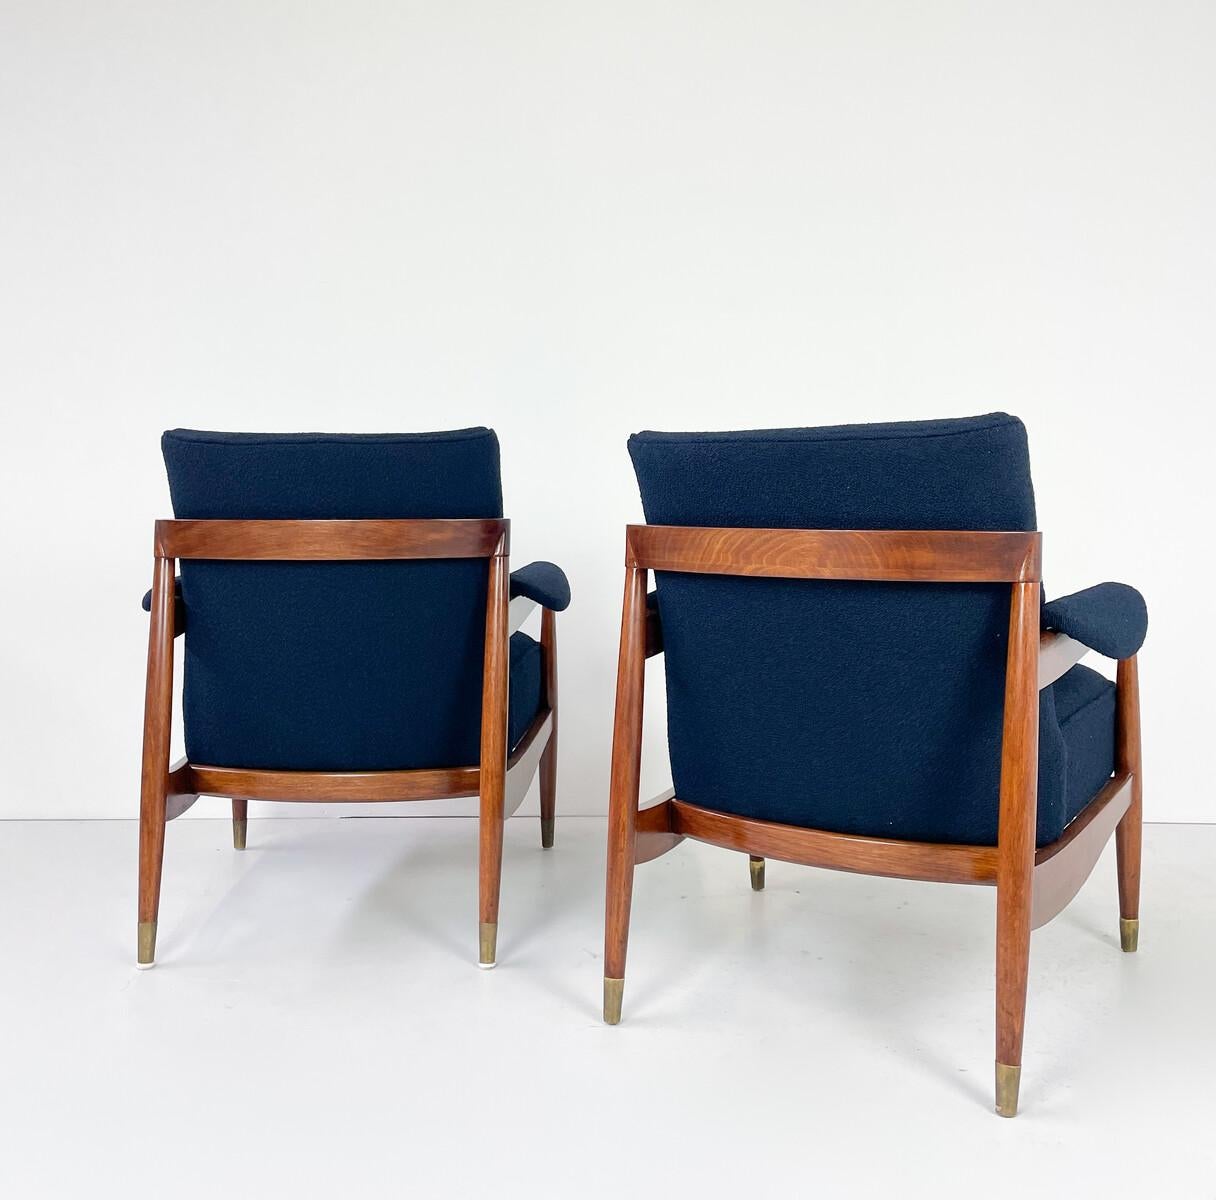 Mid-Century Modern Pair of Armchairs, Wood and Blue Boucle Fabric, Italy, 1960s - New Upholstery